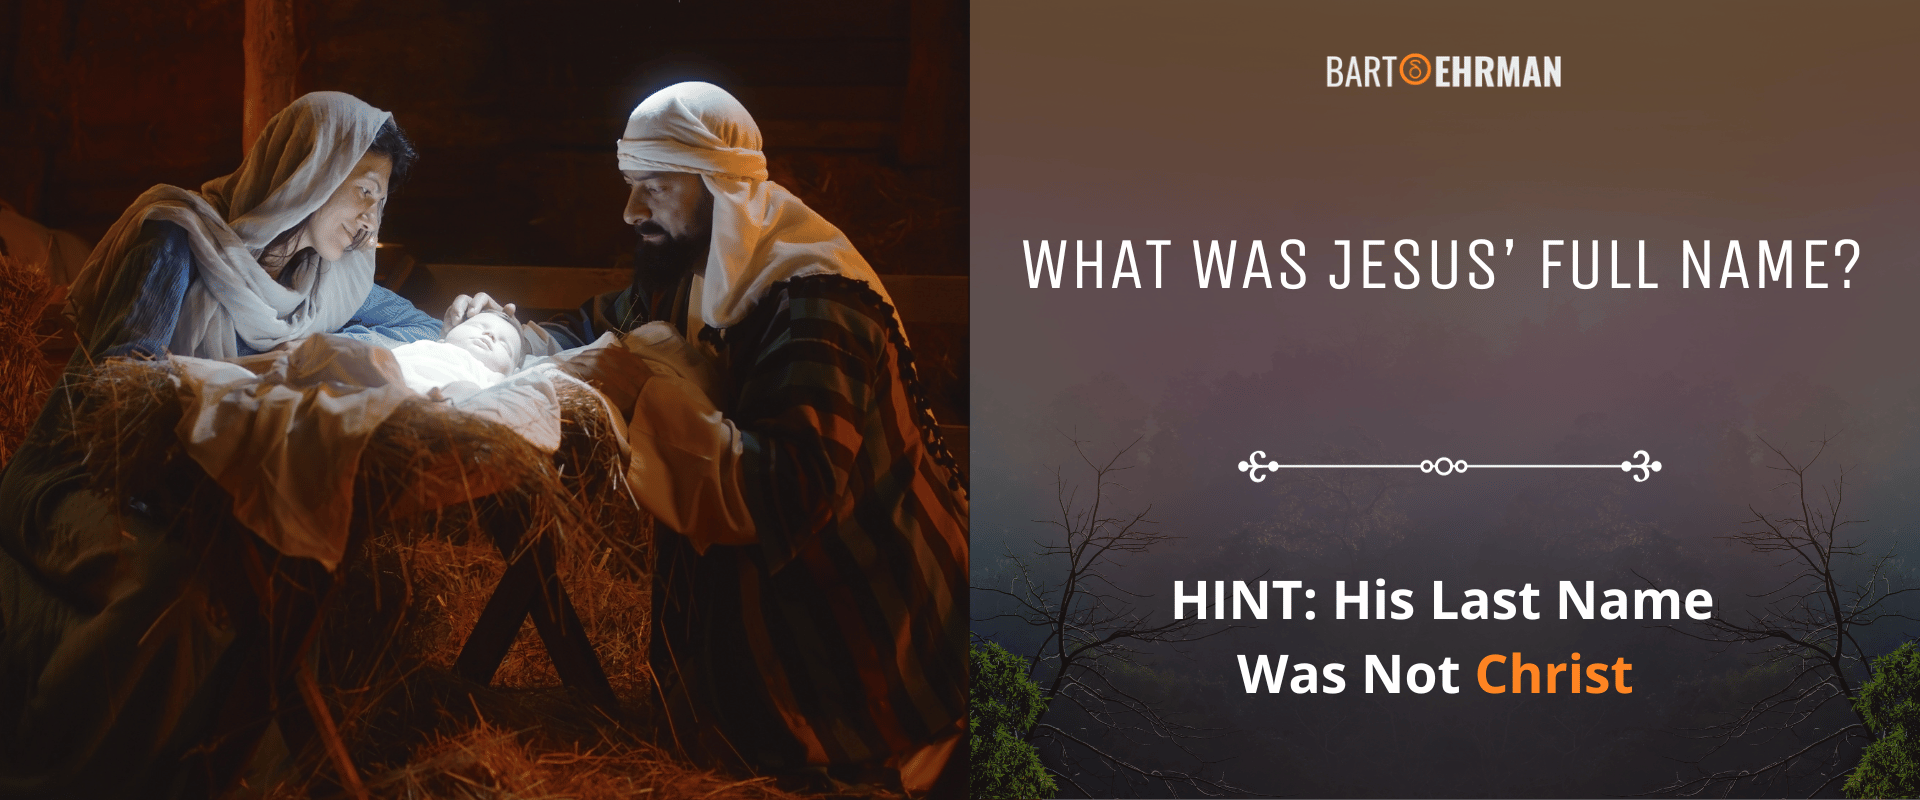 What Was Jesus' Full Name - HINT, His Last Name Was Not Christ